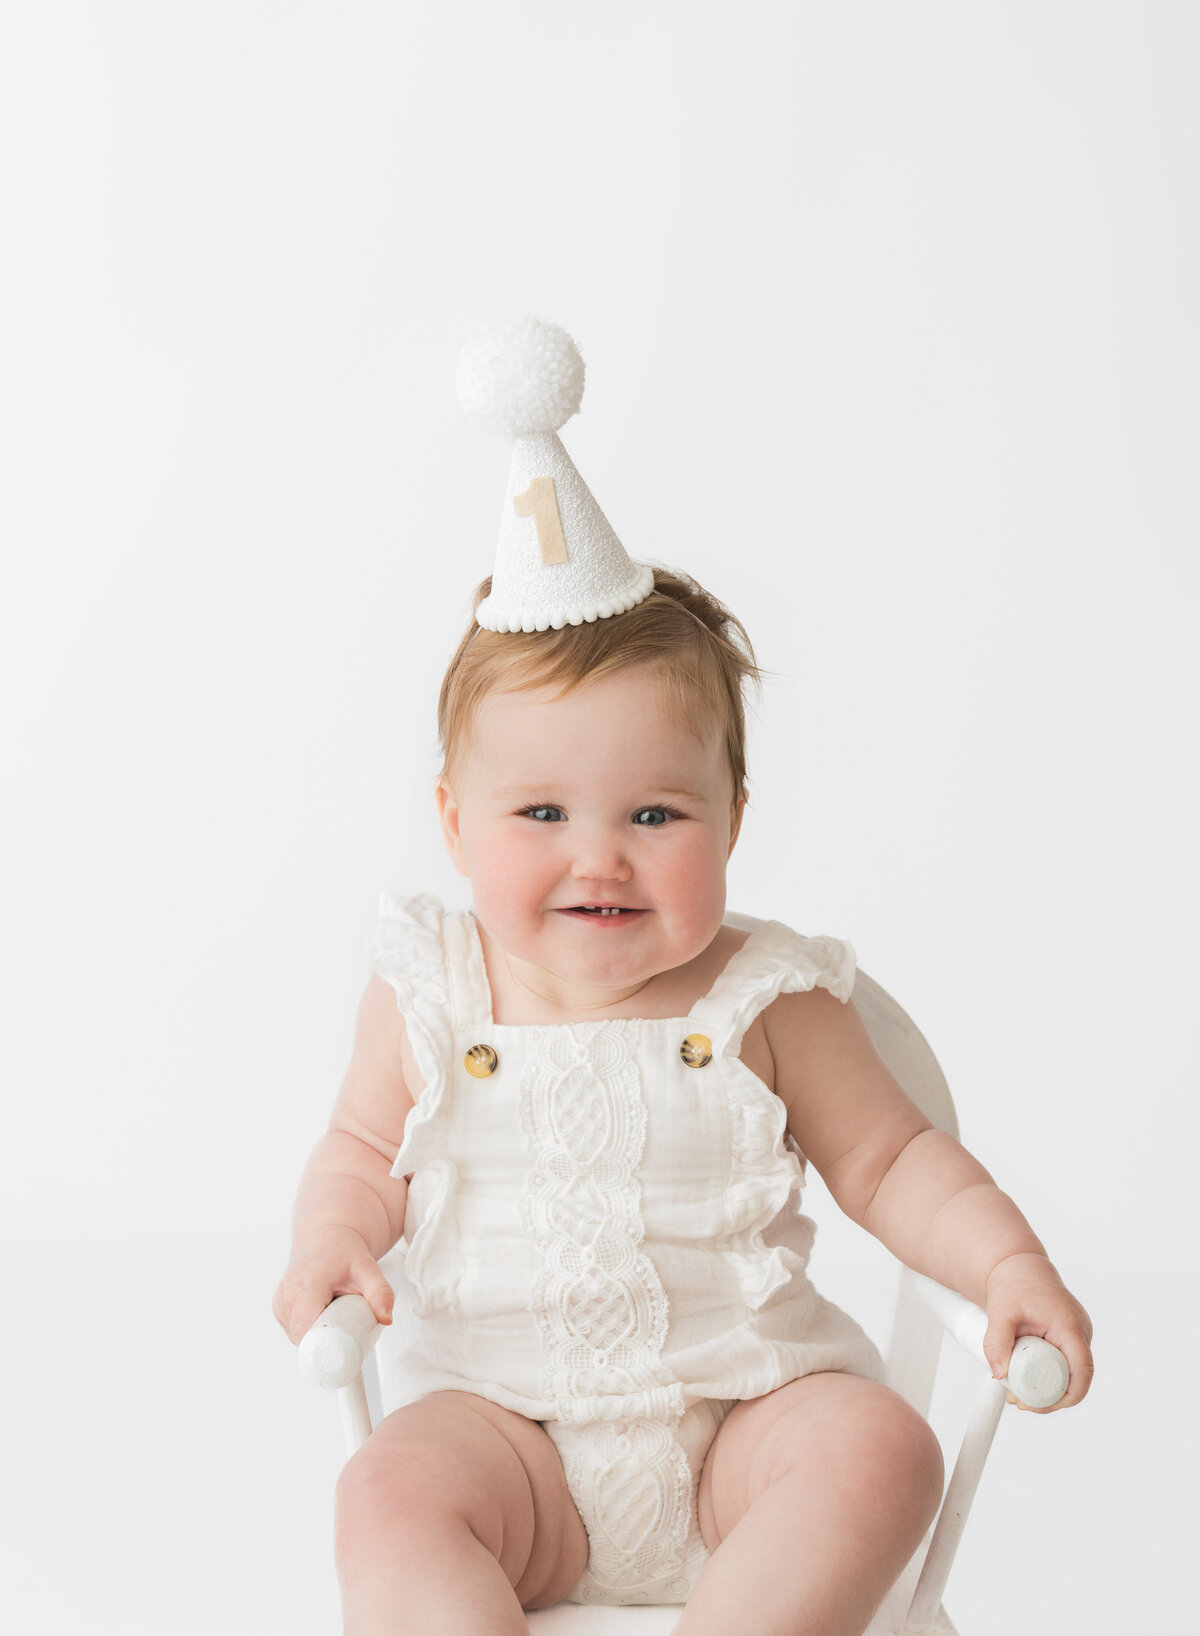 Baby wearing a party hat at a first birthday photoshoot by Hobart Photographer Lauren Vanier